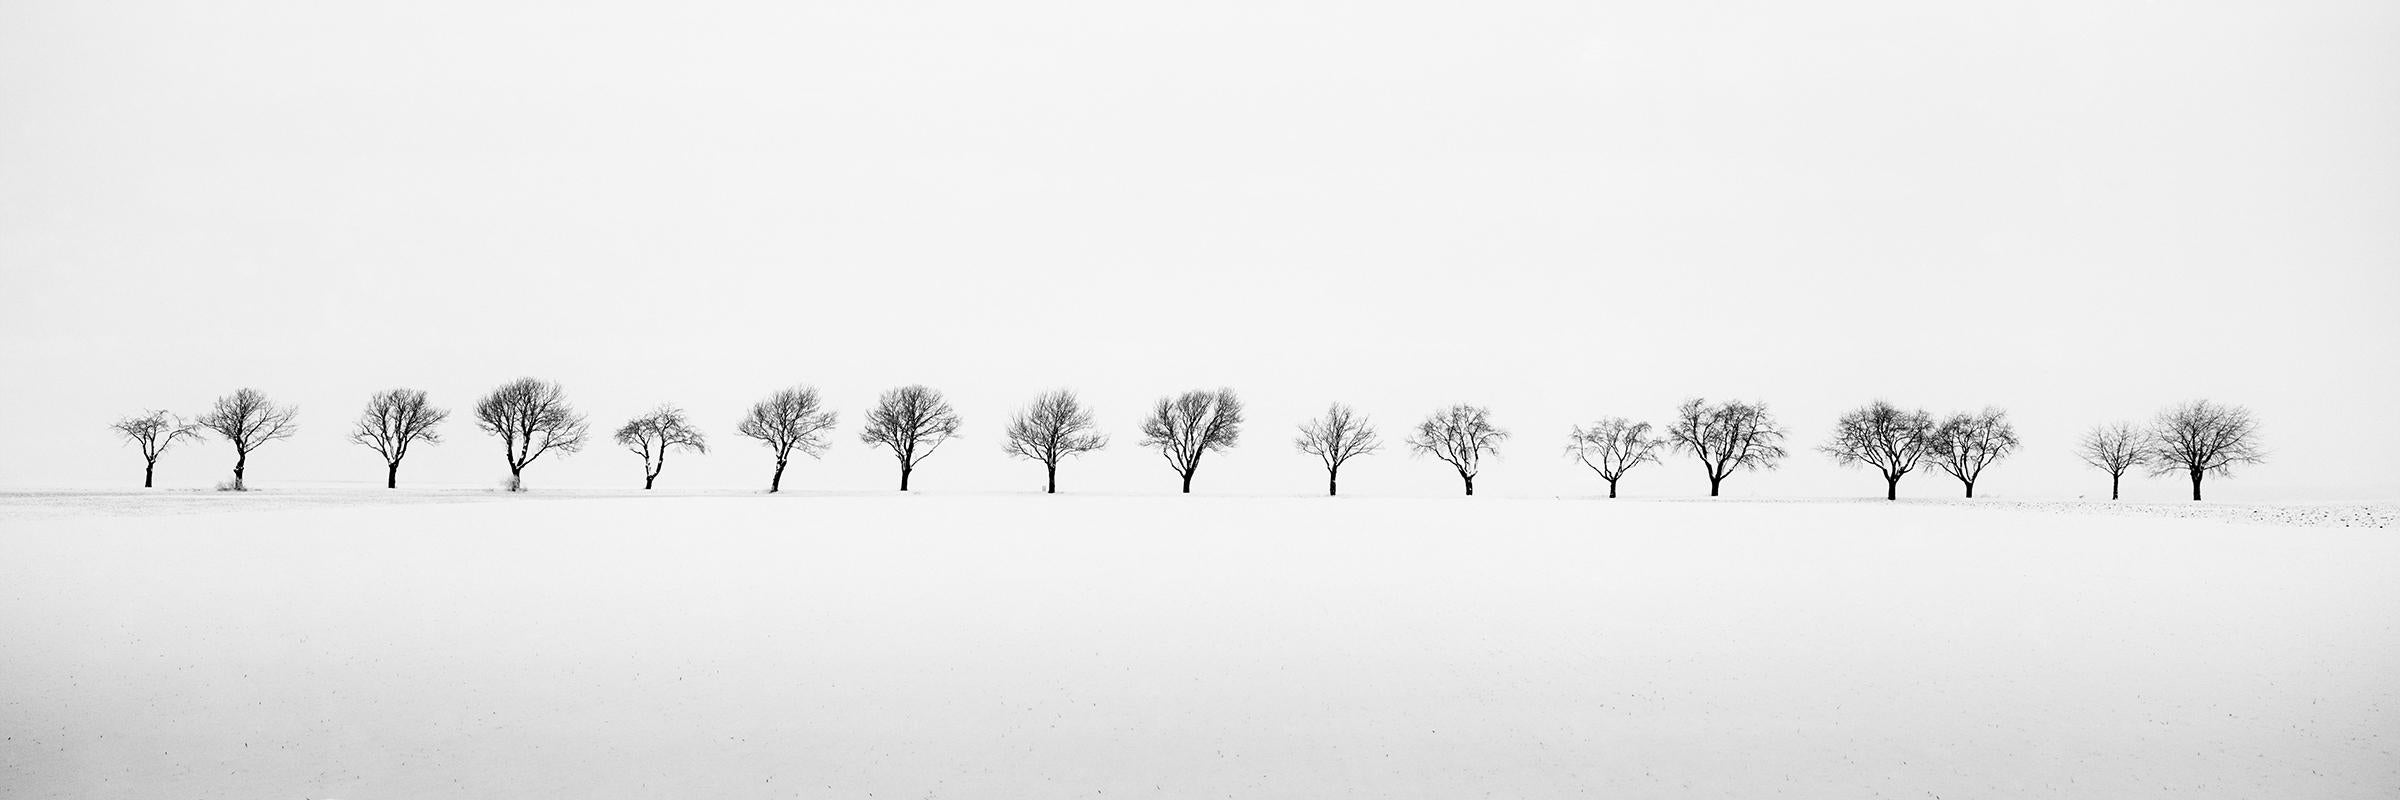 Gerald Berghammer Black and White Photograph - Cherry Trees in Snow Field, minimalist black and white photography, landscape